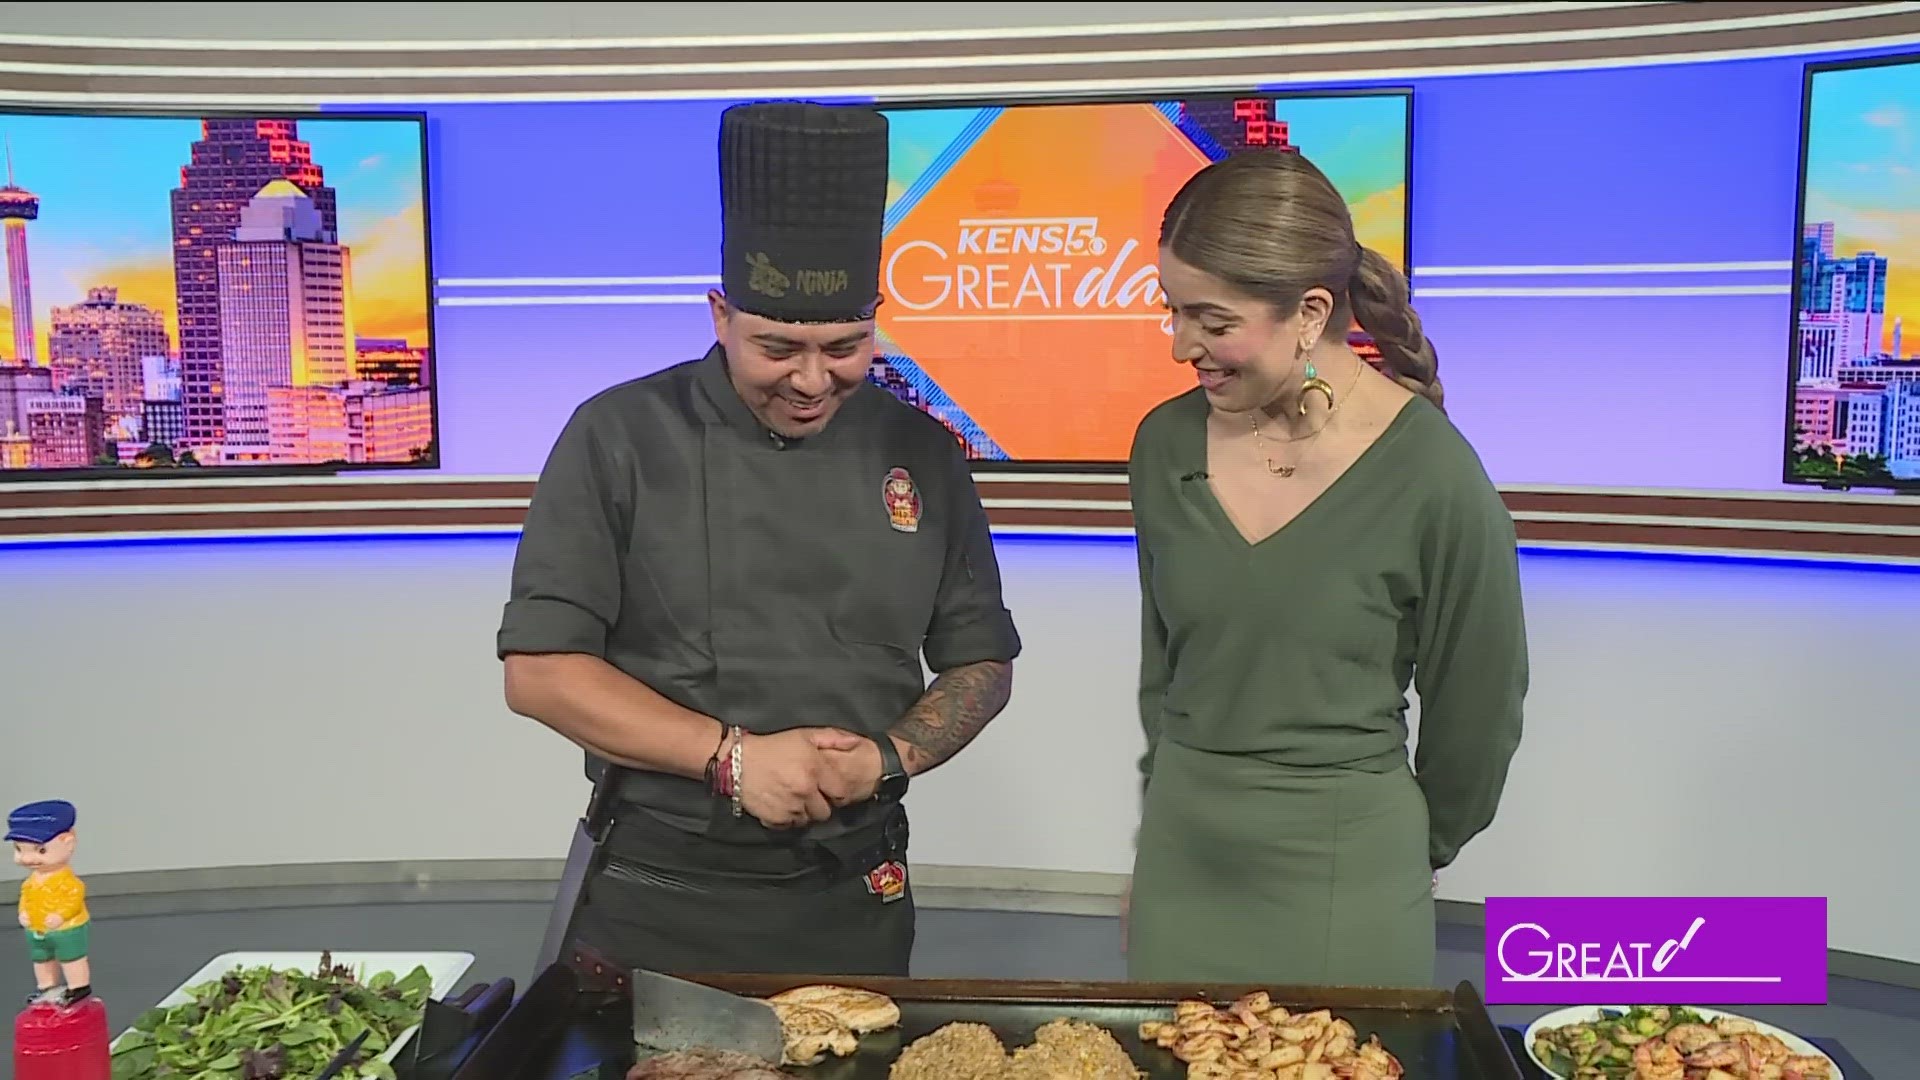 Chef Daniel with Let's Hibachi cooks up some delicious Japanese-style dishes.